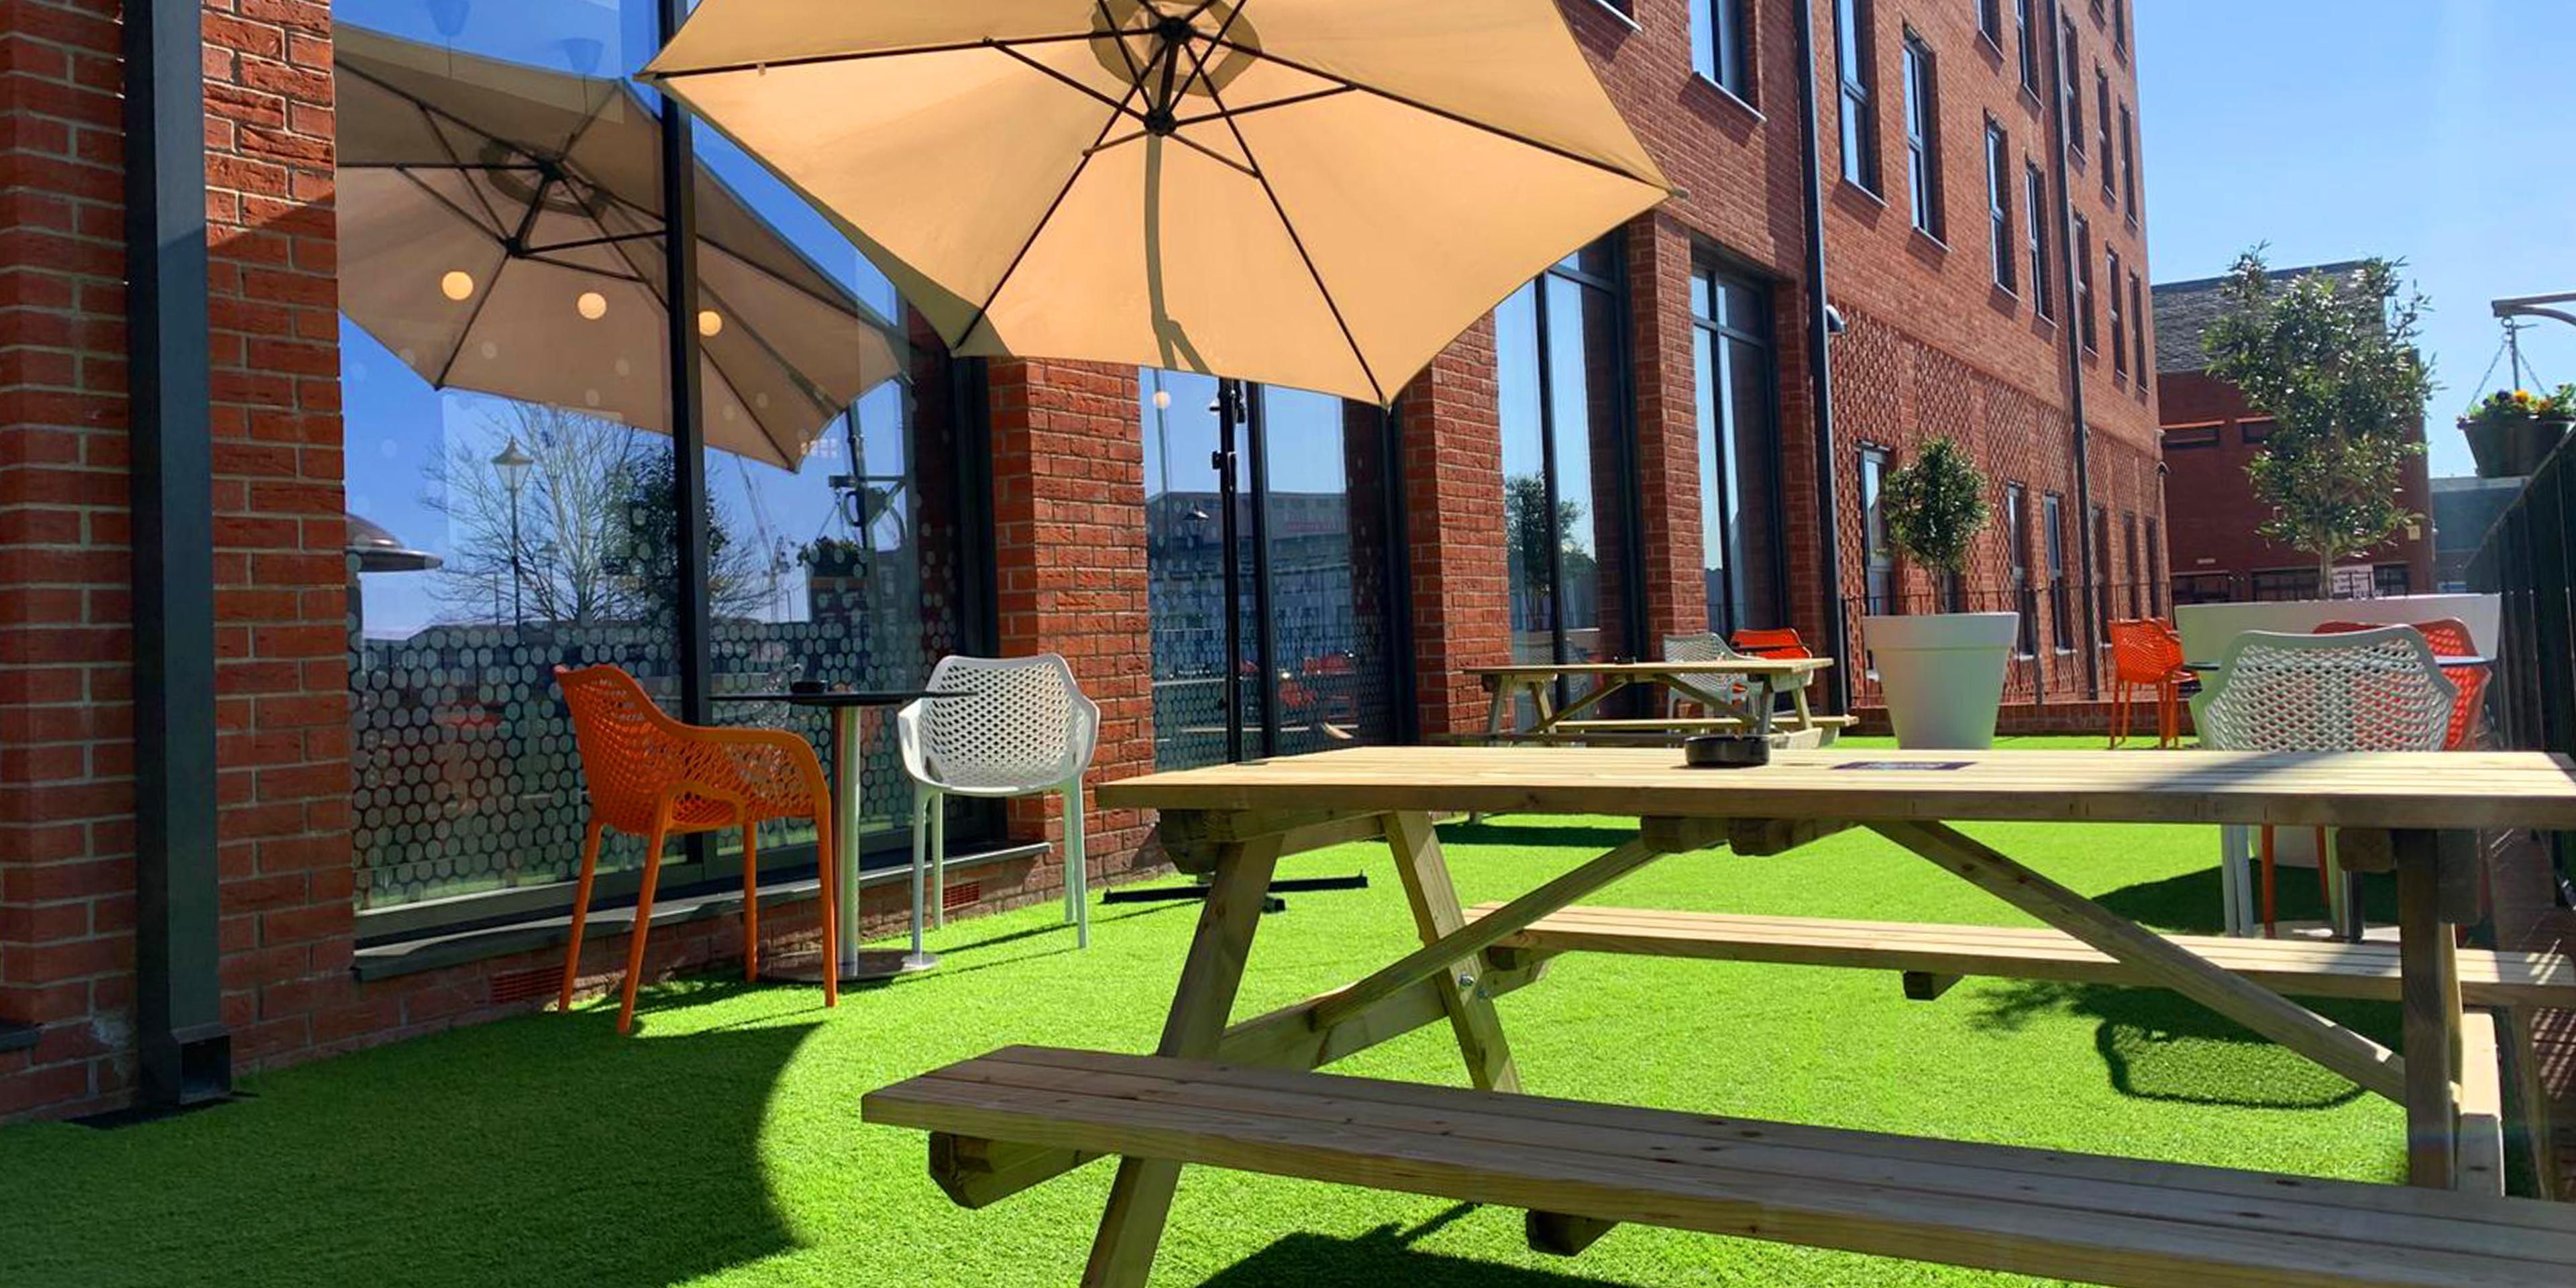 We have a brand new outdoor terrace which is a perfect space for dining and drinking.
Relax in the sun with some lunch and take advantage of our seasonal offer on Aperol Spritz.